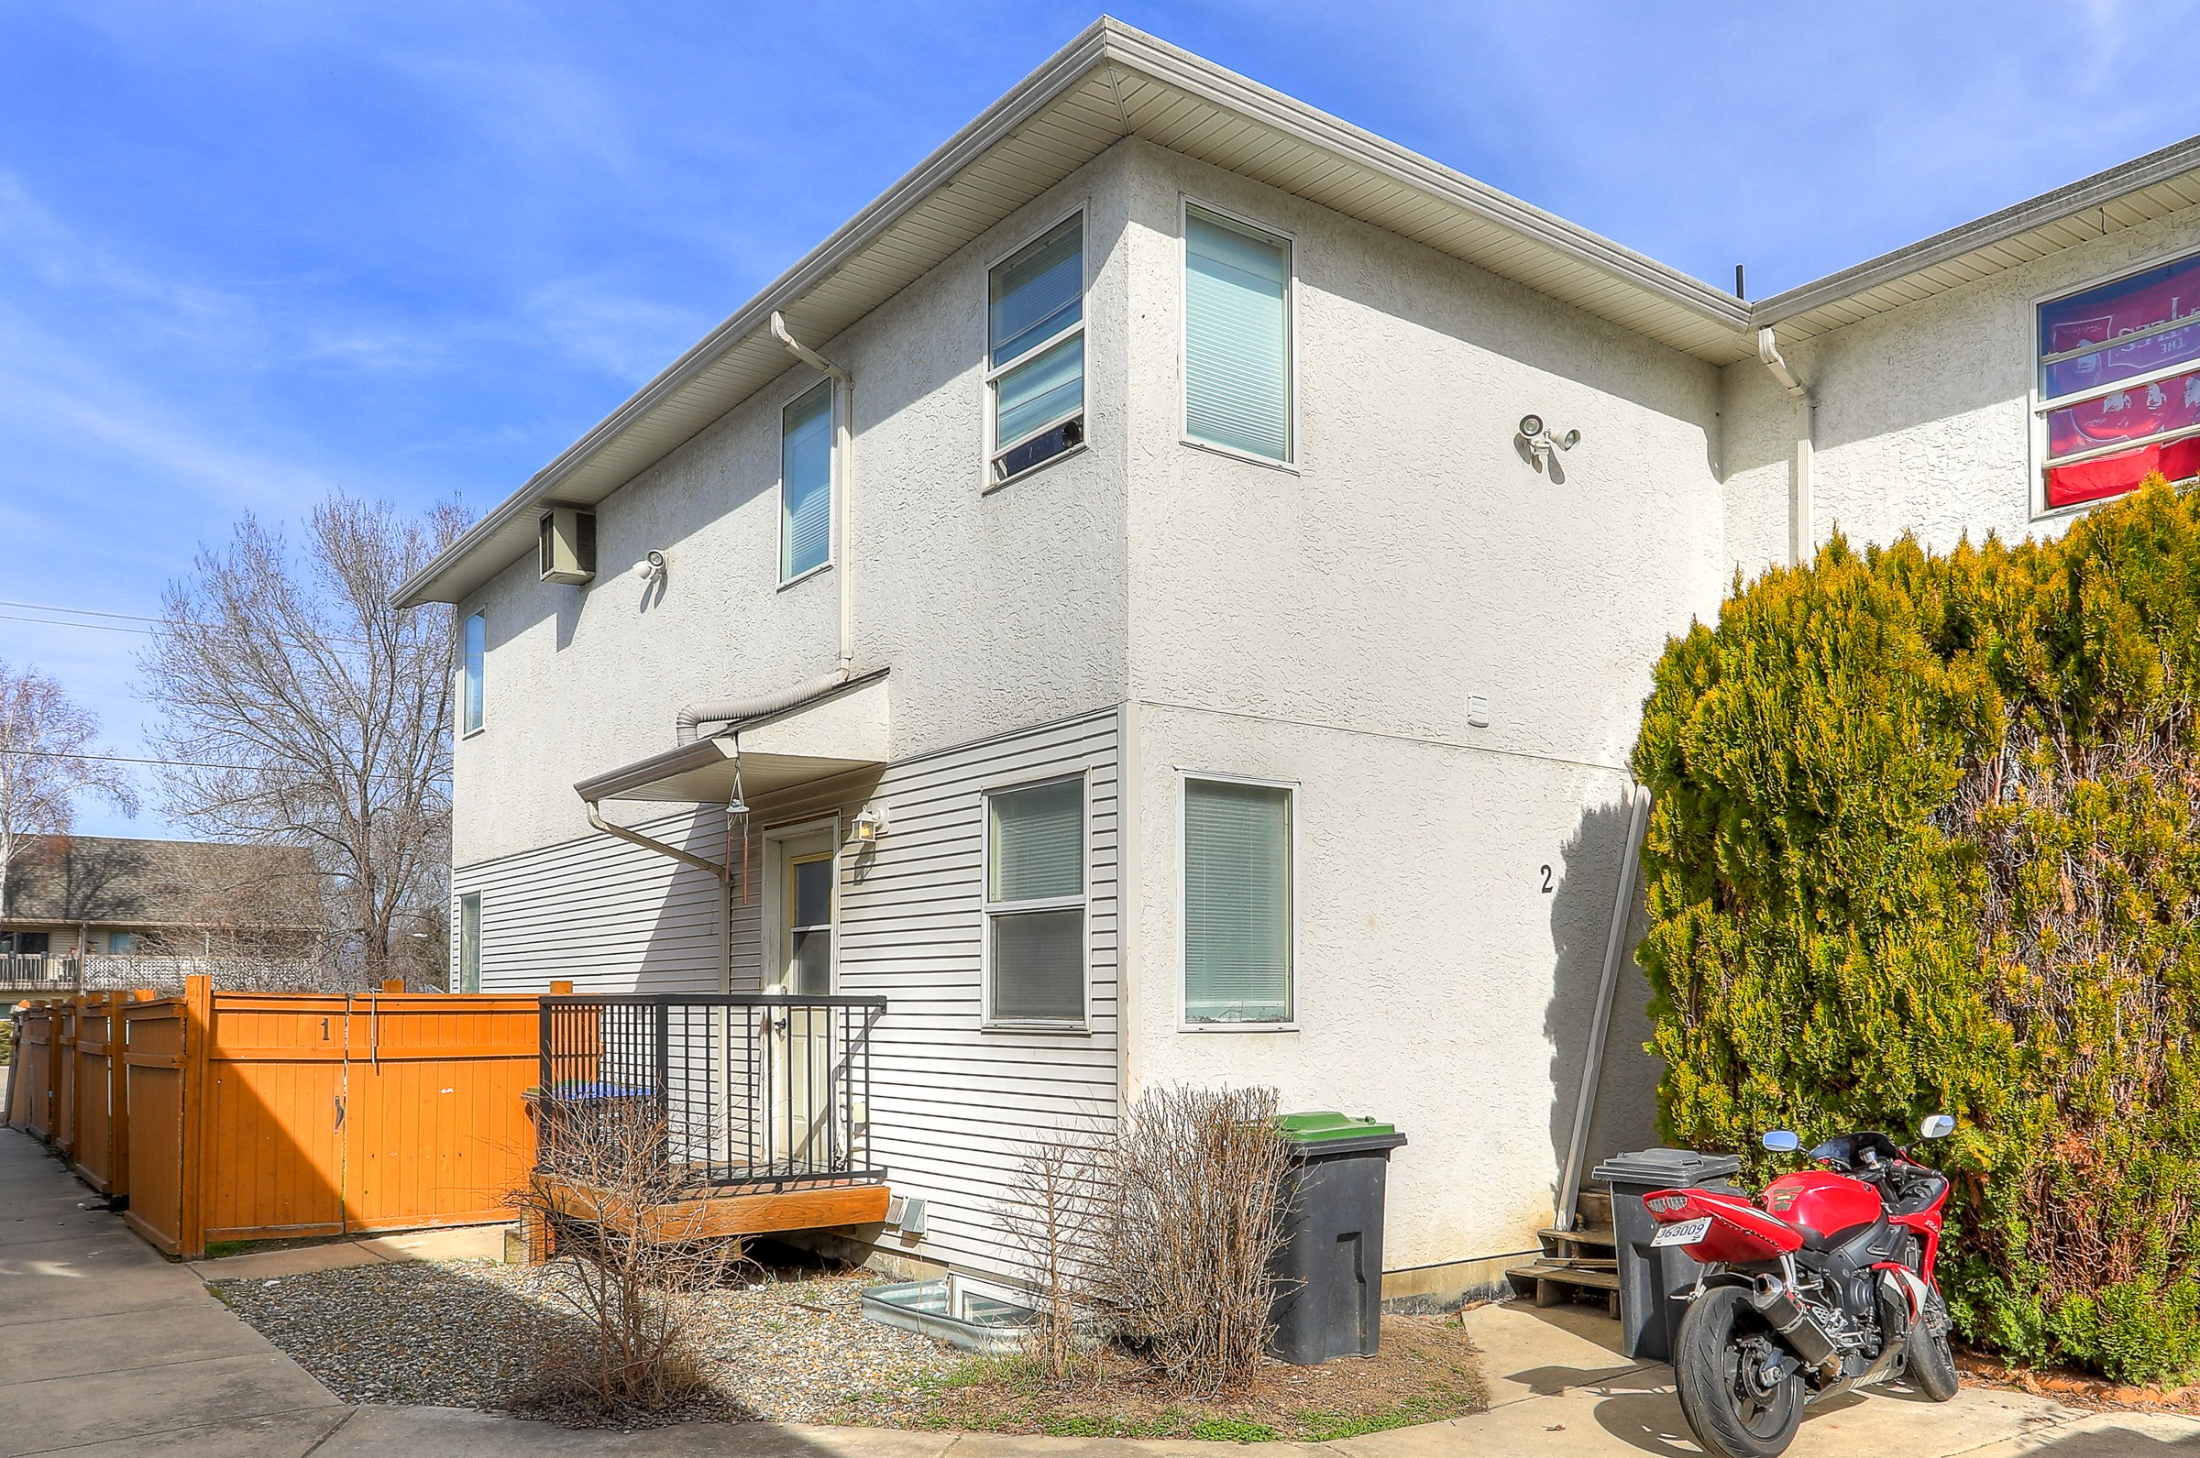 New property listed in Kelowna